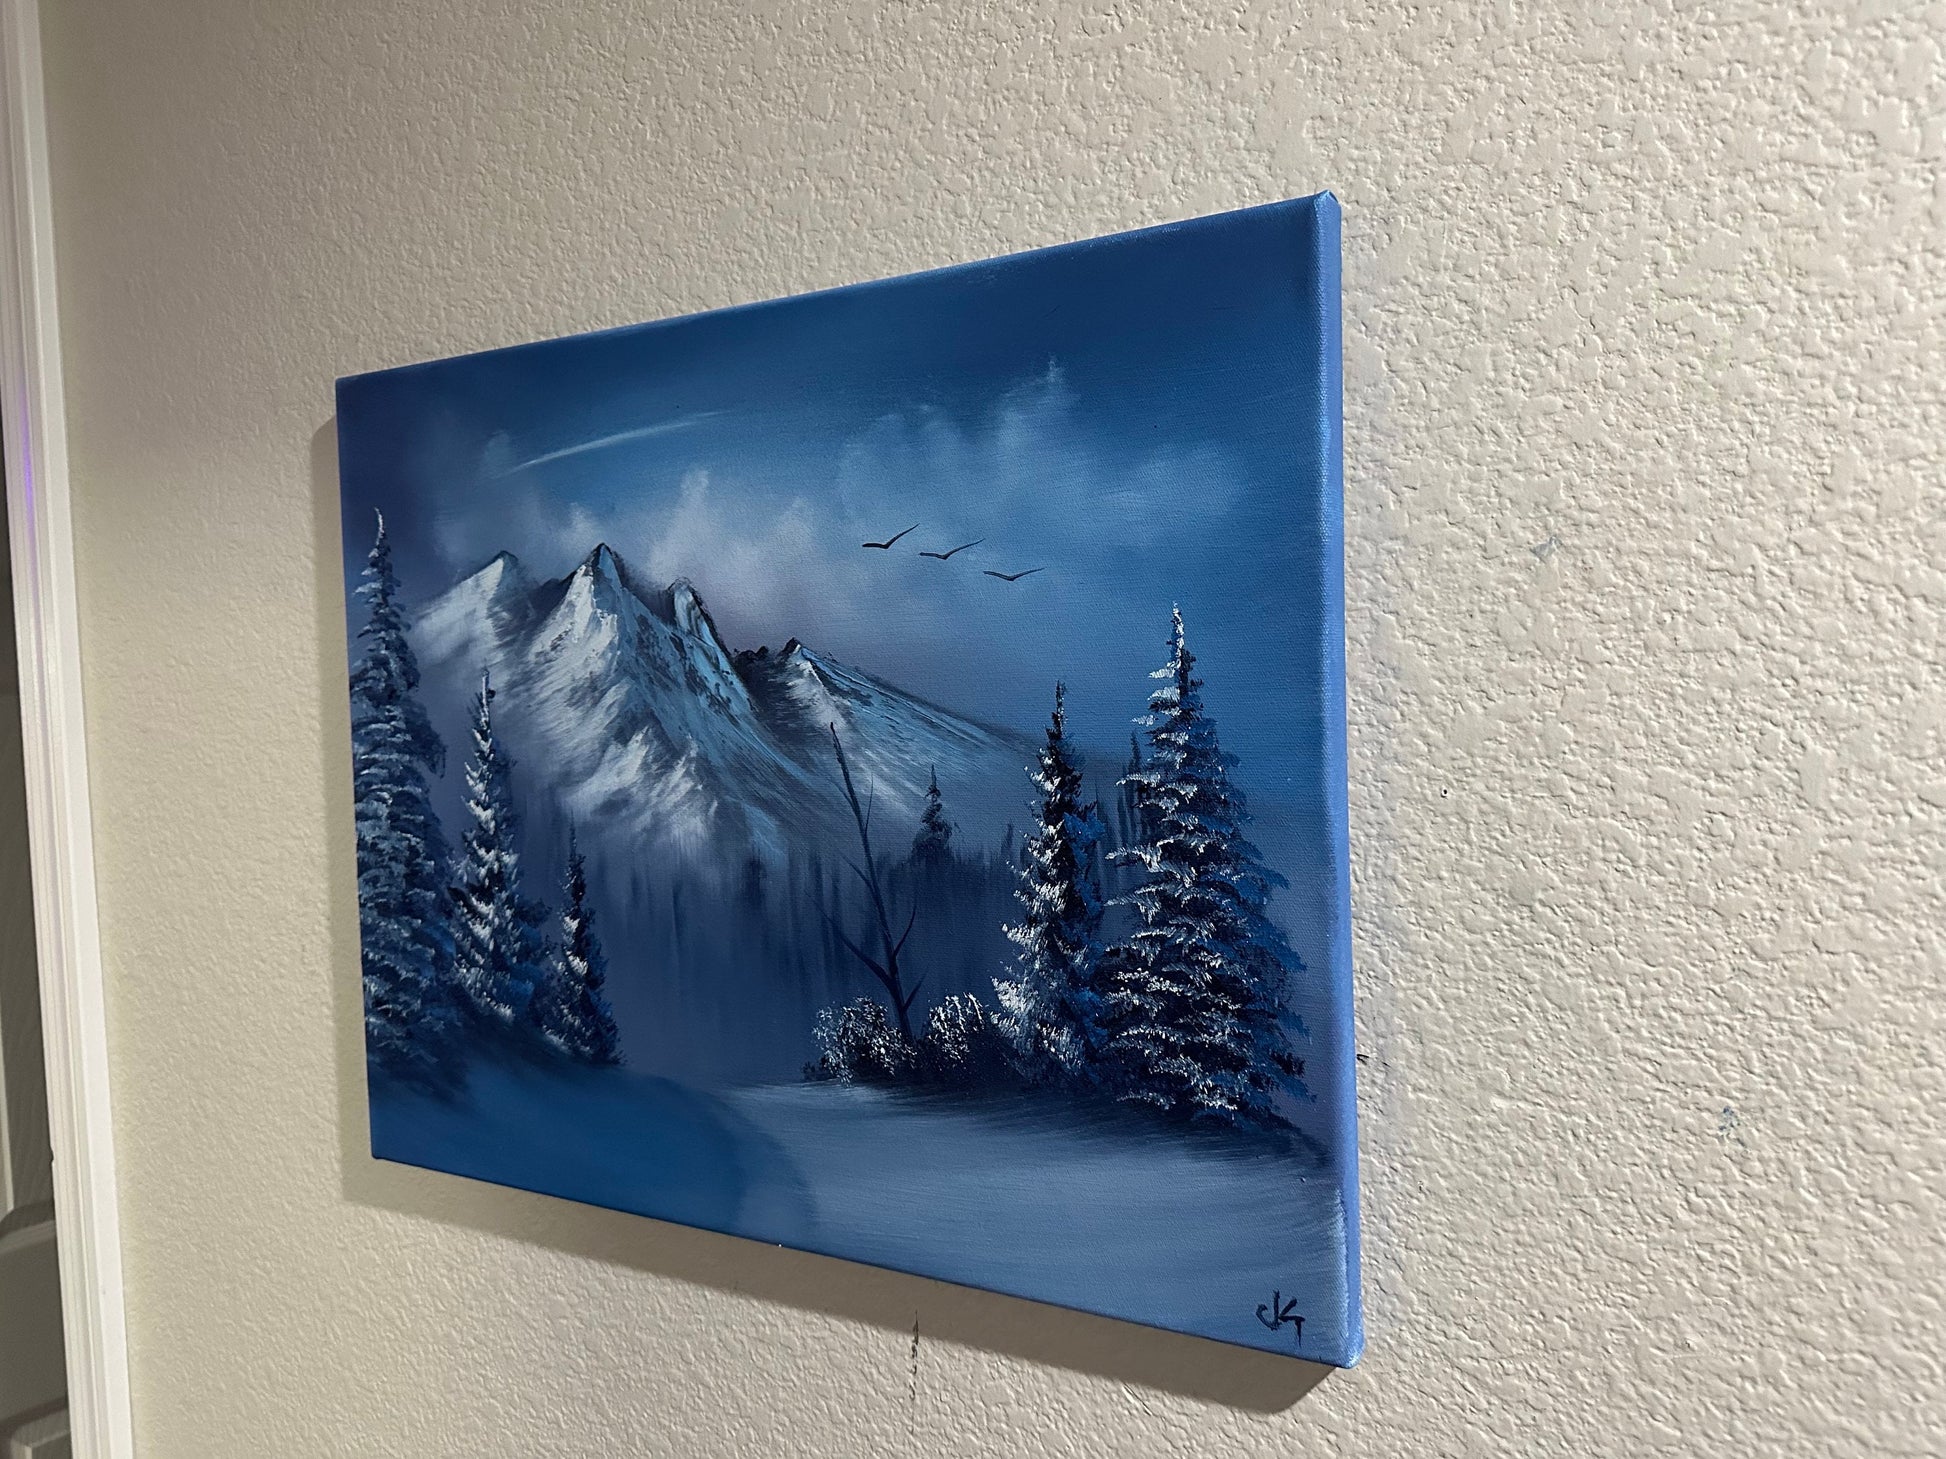 Painting 993 & 1/2 - 16x20" Canvas - Winter Landscape painted Live on TikTok on 10/27/23 by PaintWithJosh